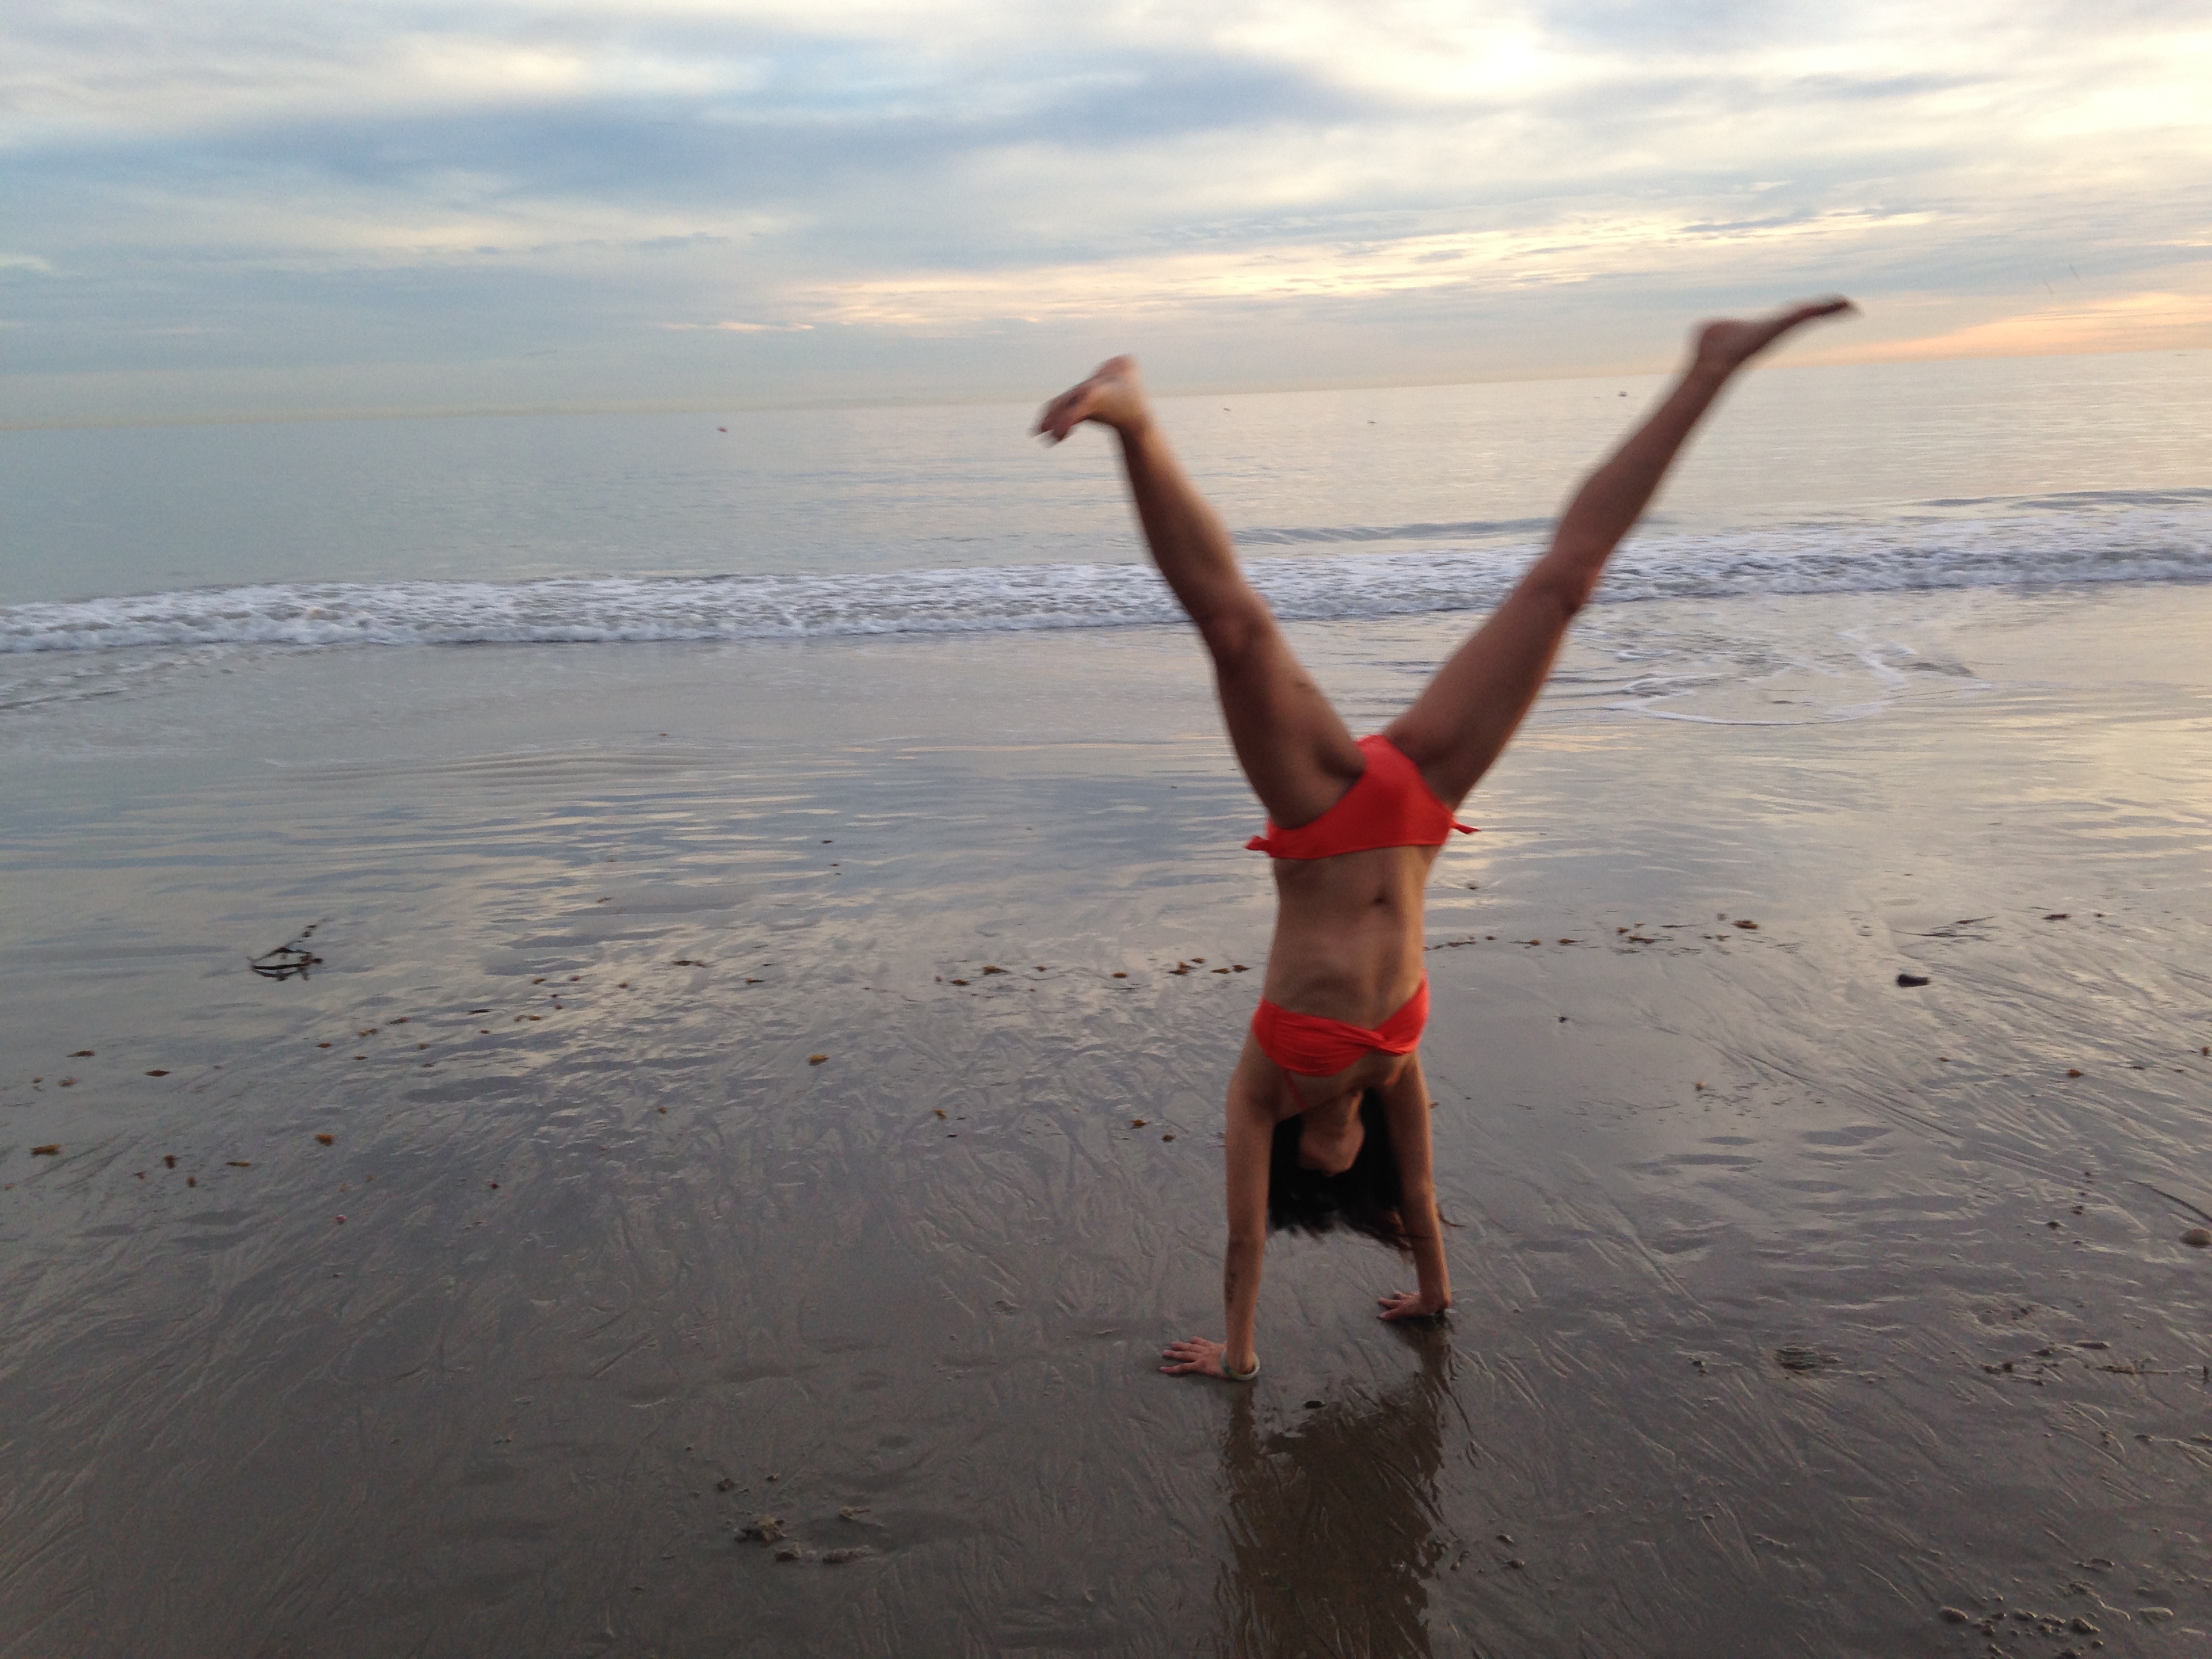 up-in-handstand-portion-of-cartwheel-at-